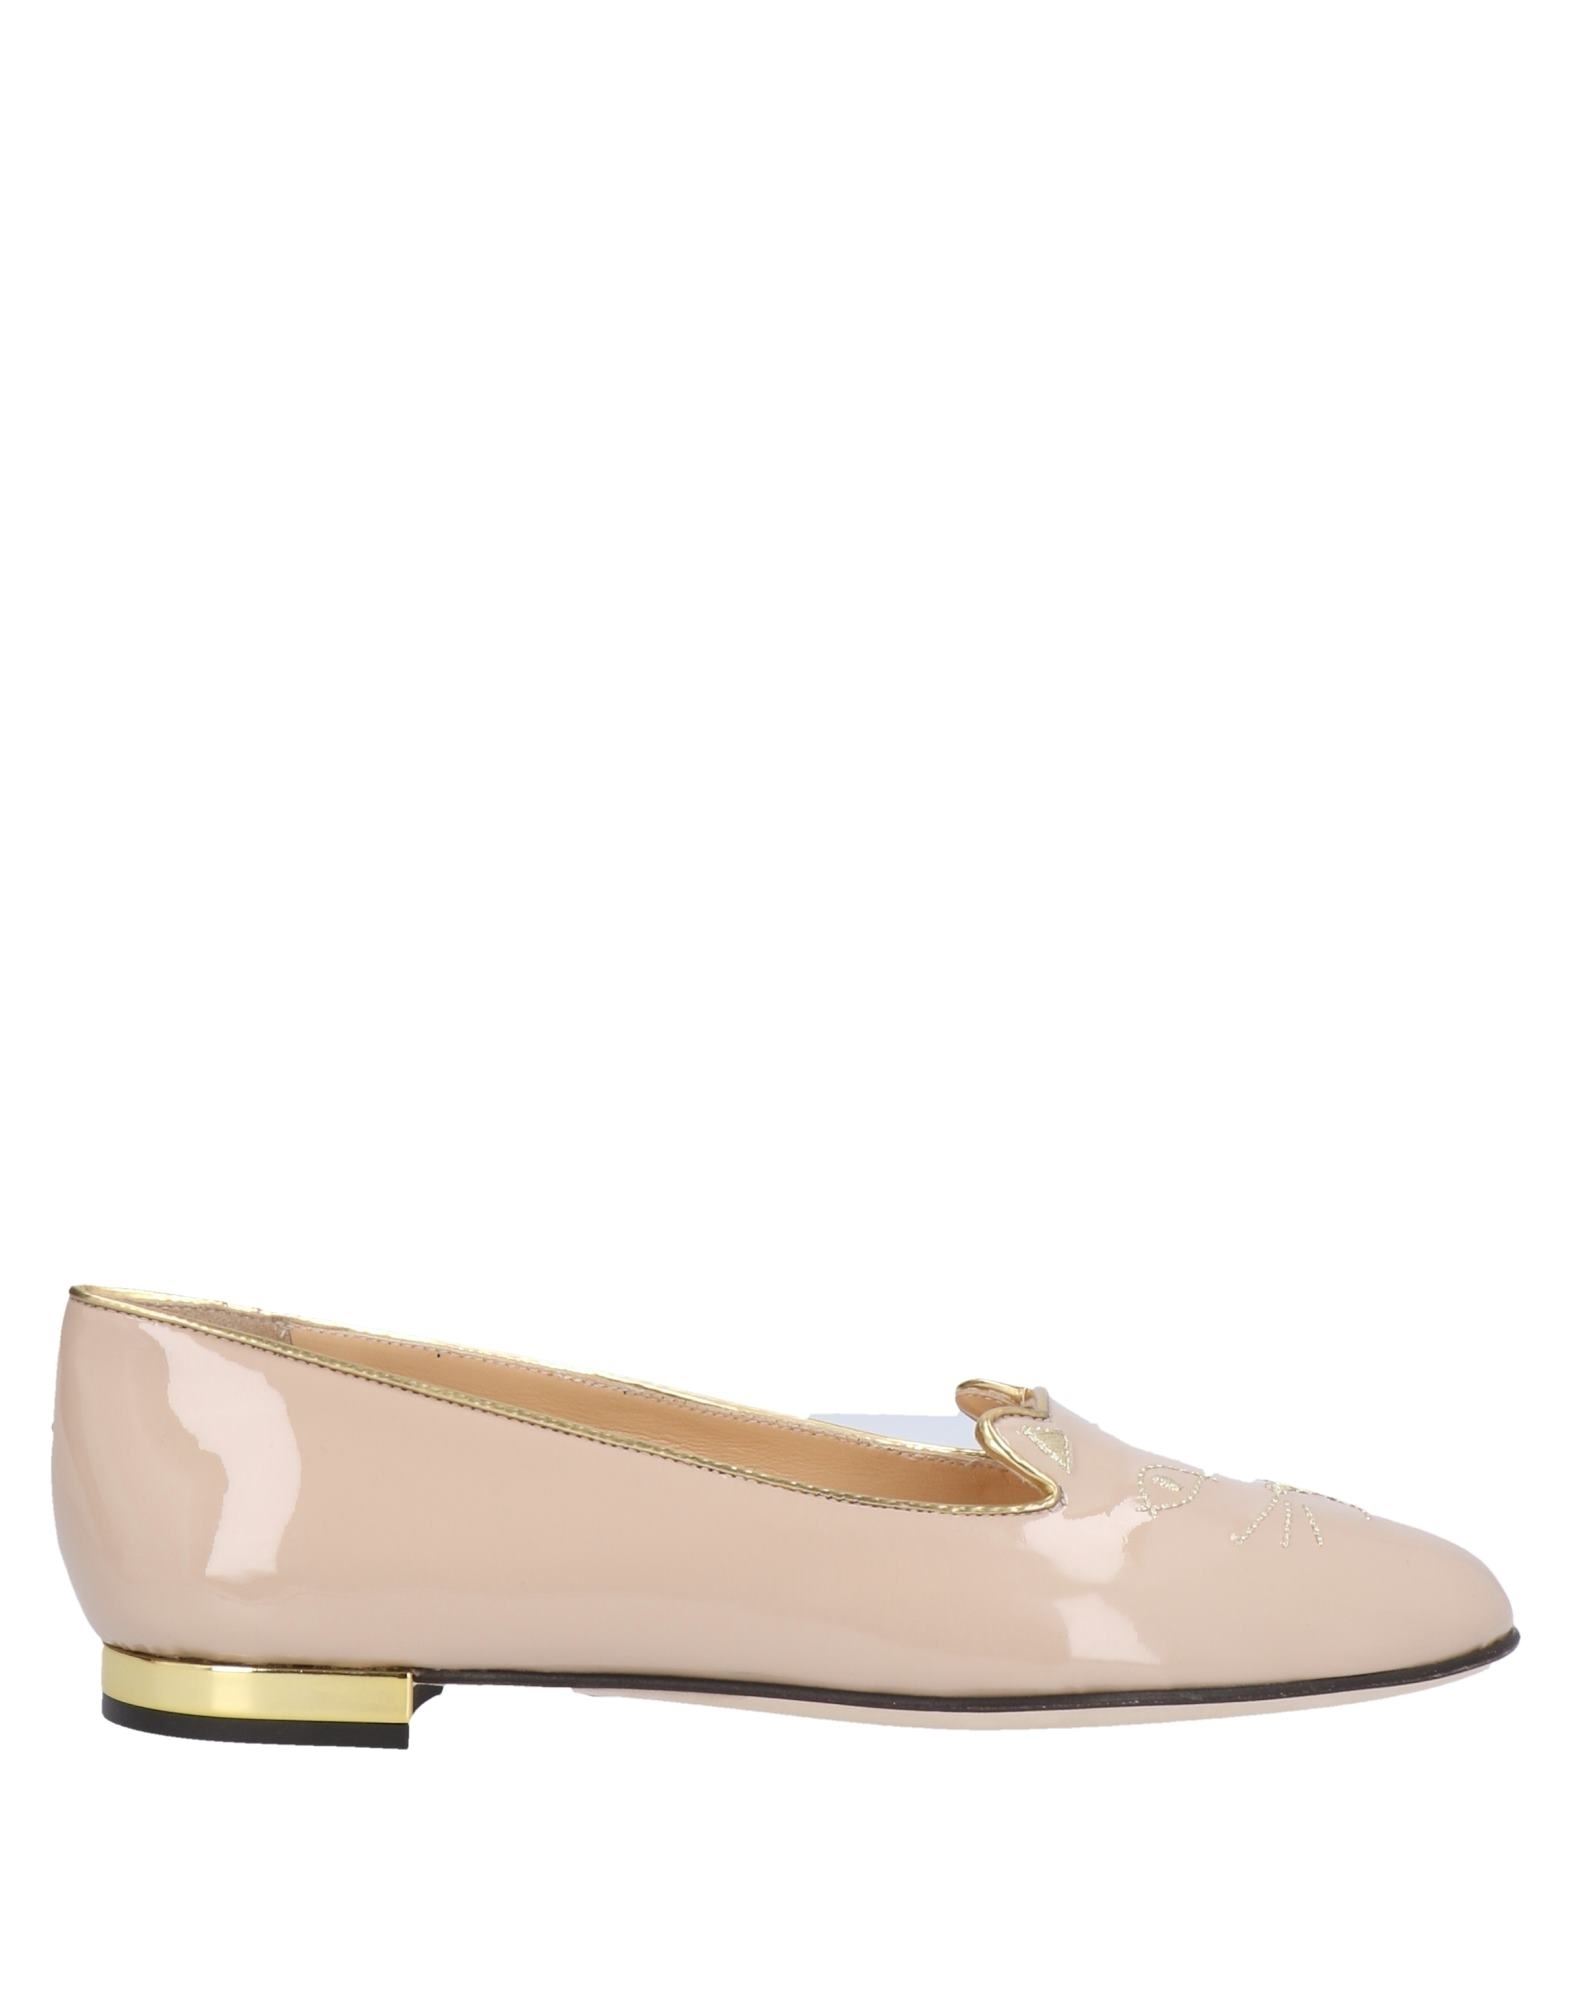 Charlotte Olympia Ballet Flats In Pale Pink